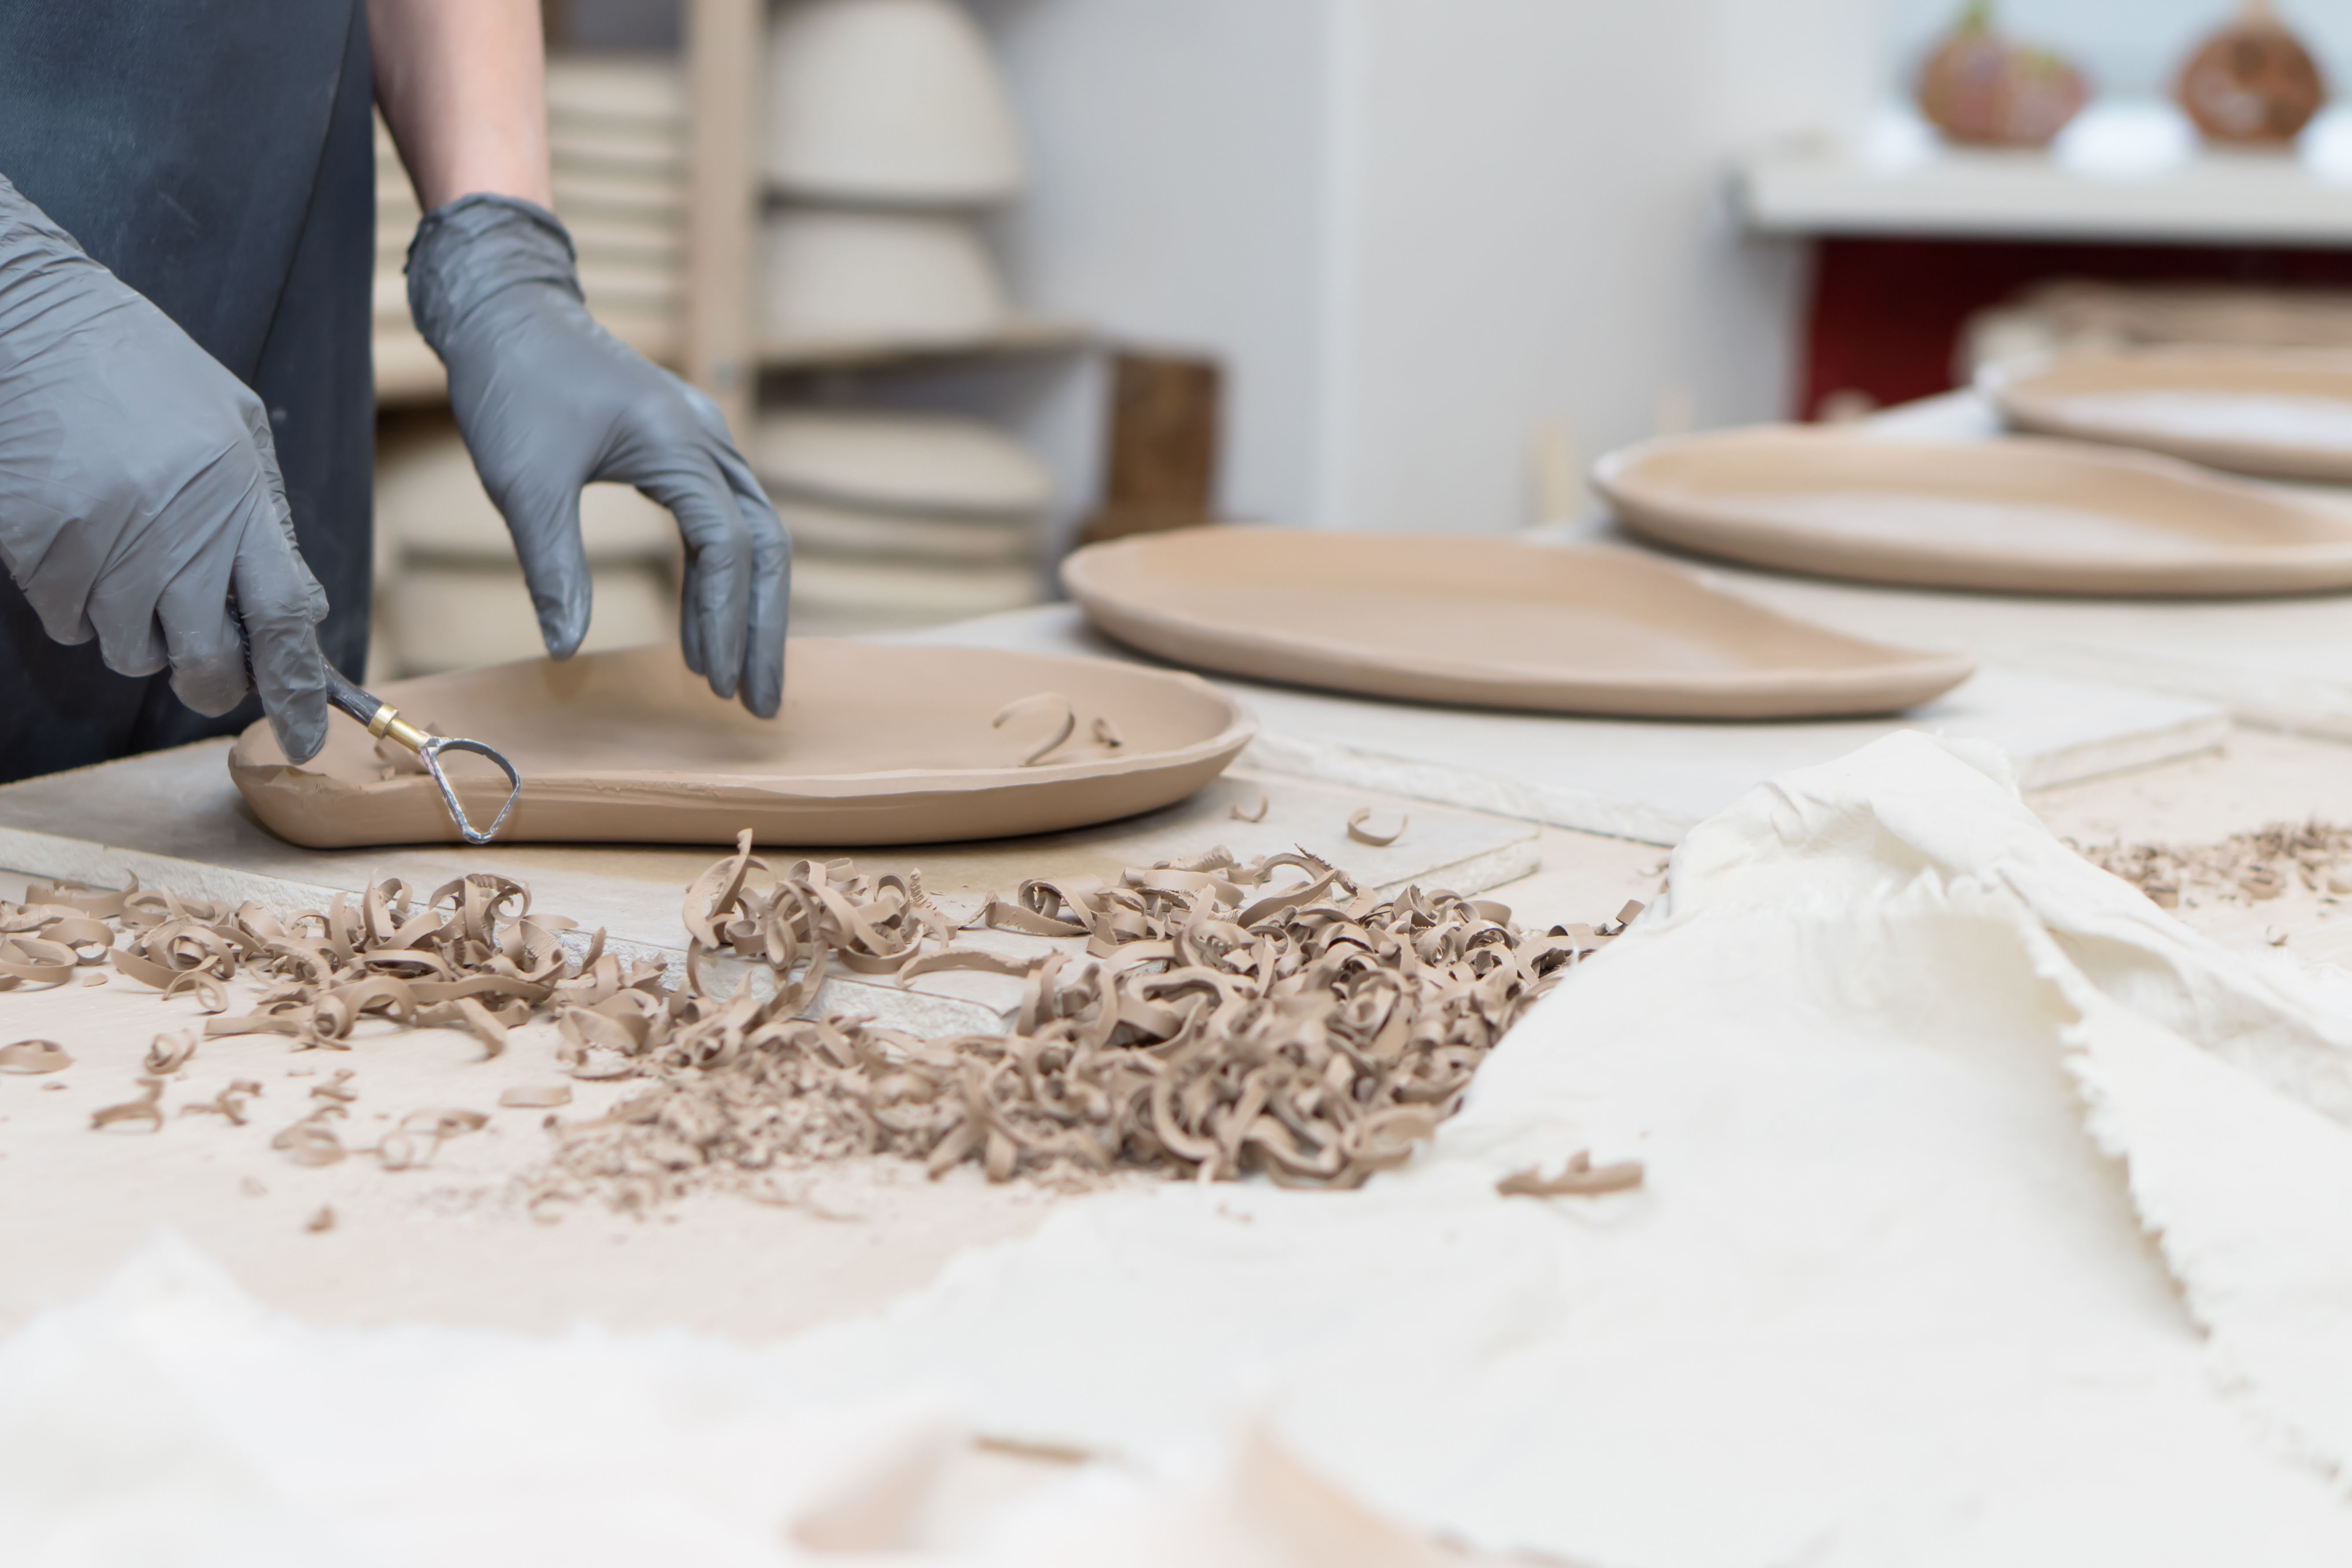 Join ceramic artist Trent Roberts to learn hybrid techniques to create plate forms.